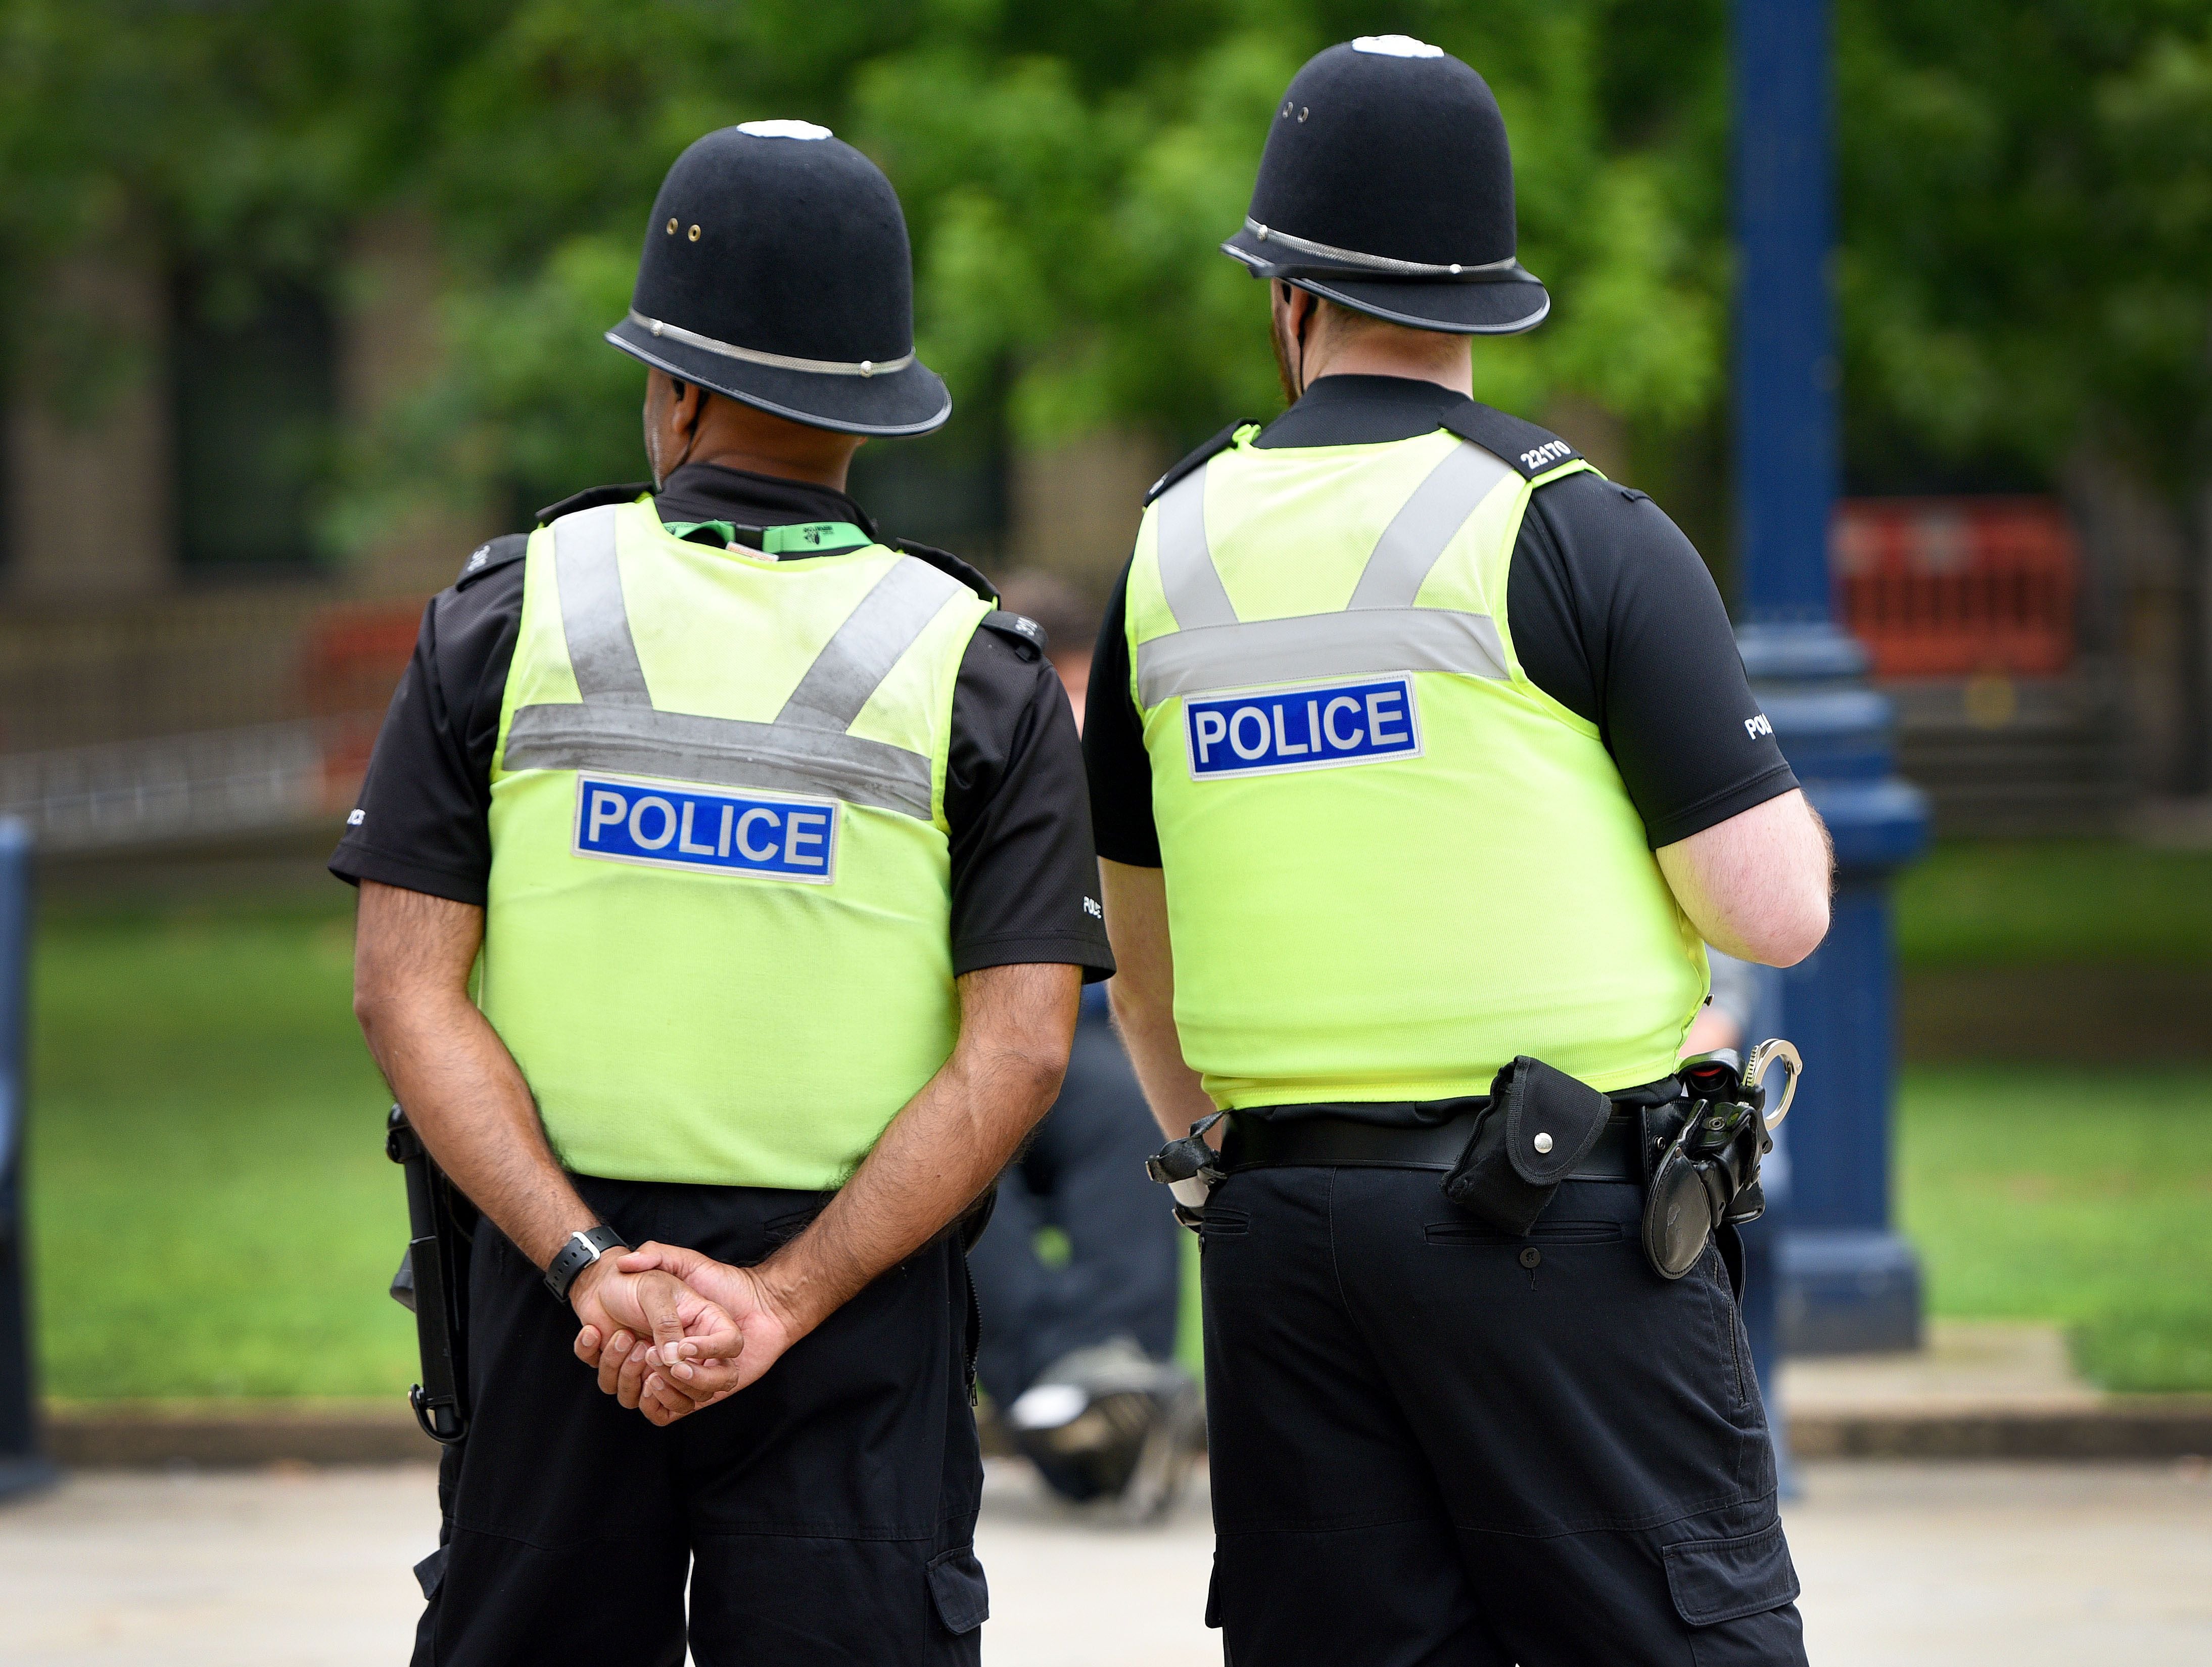 Police on patrol after reports of man exposing himself in South Staffordshire town